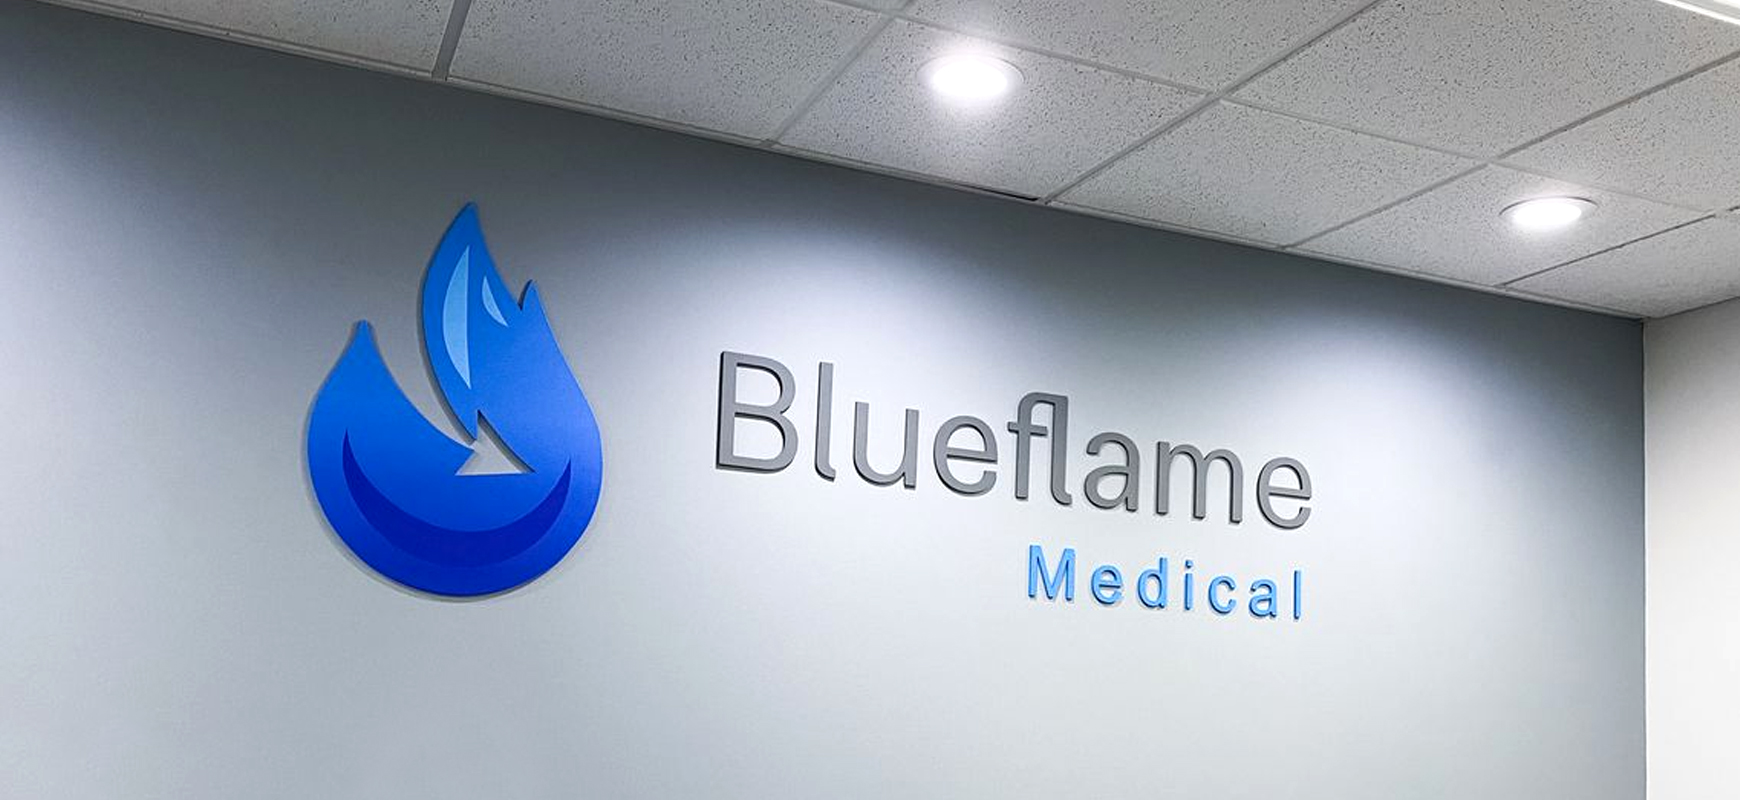 Blueflame indoor medical office signs displaying the brand name and logo